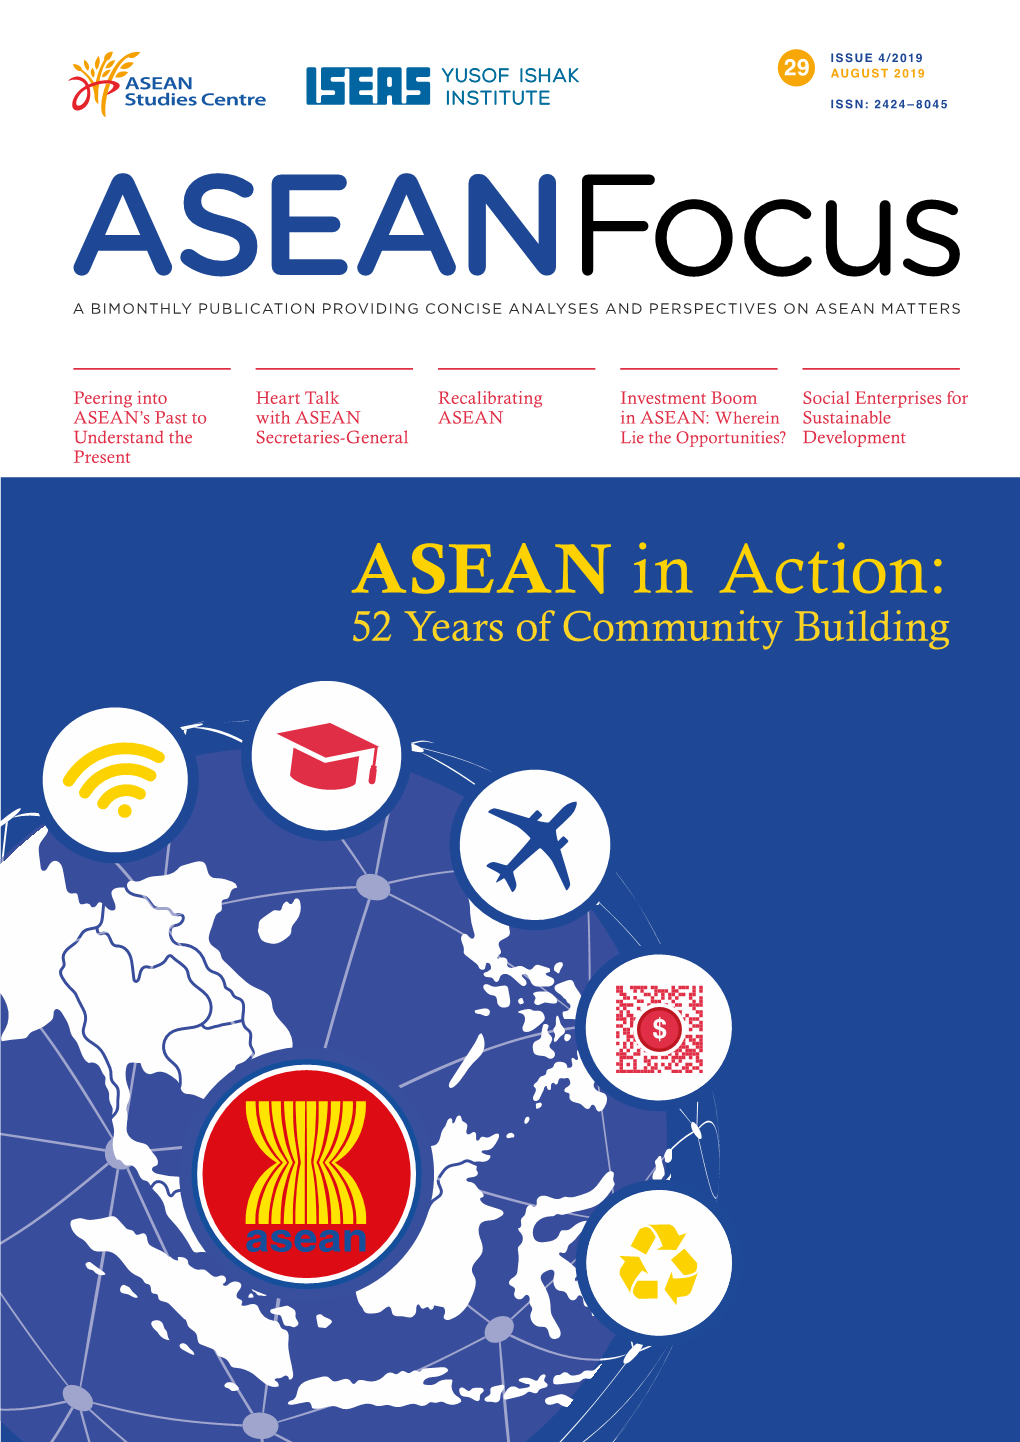 ASEAN in Action